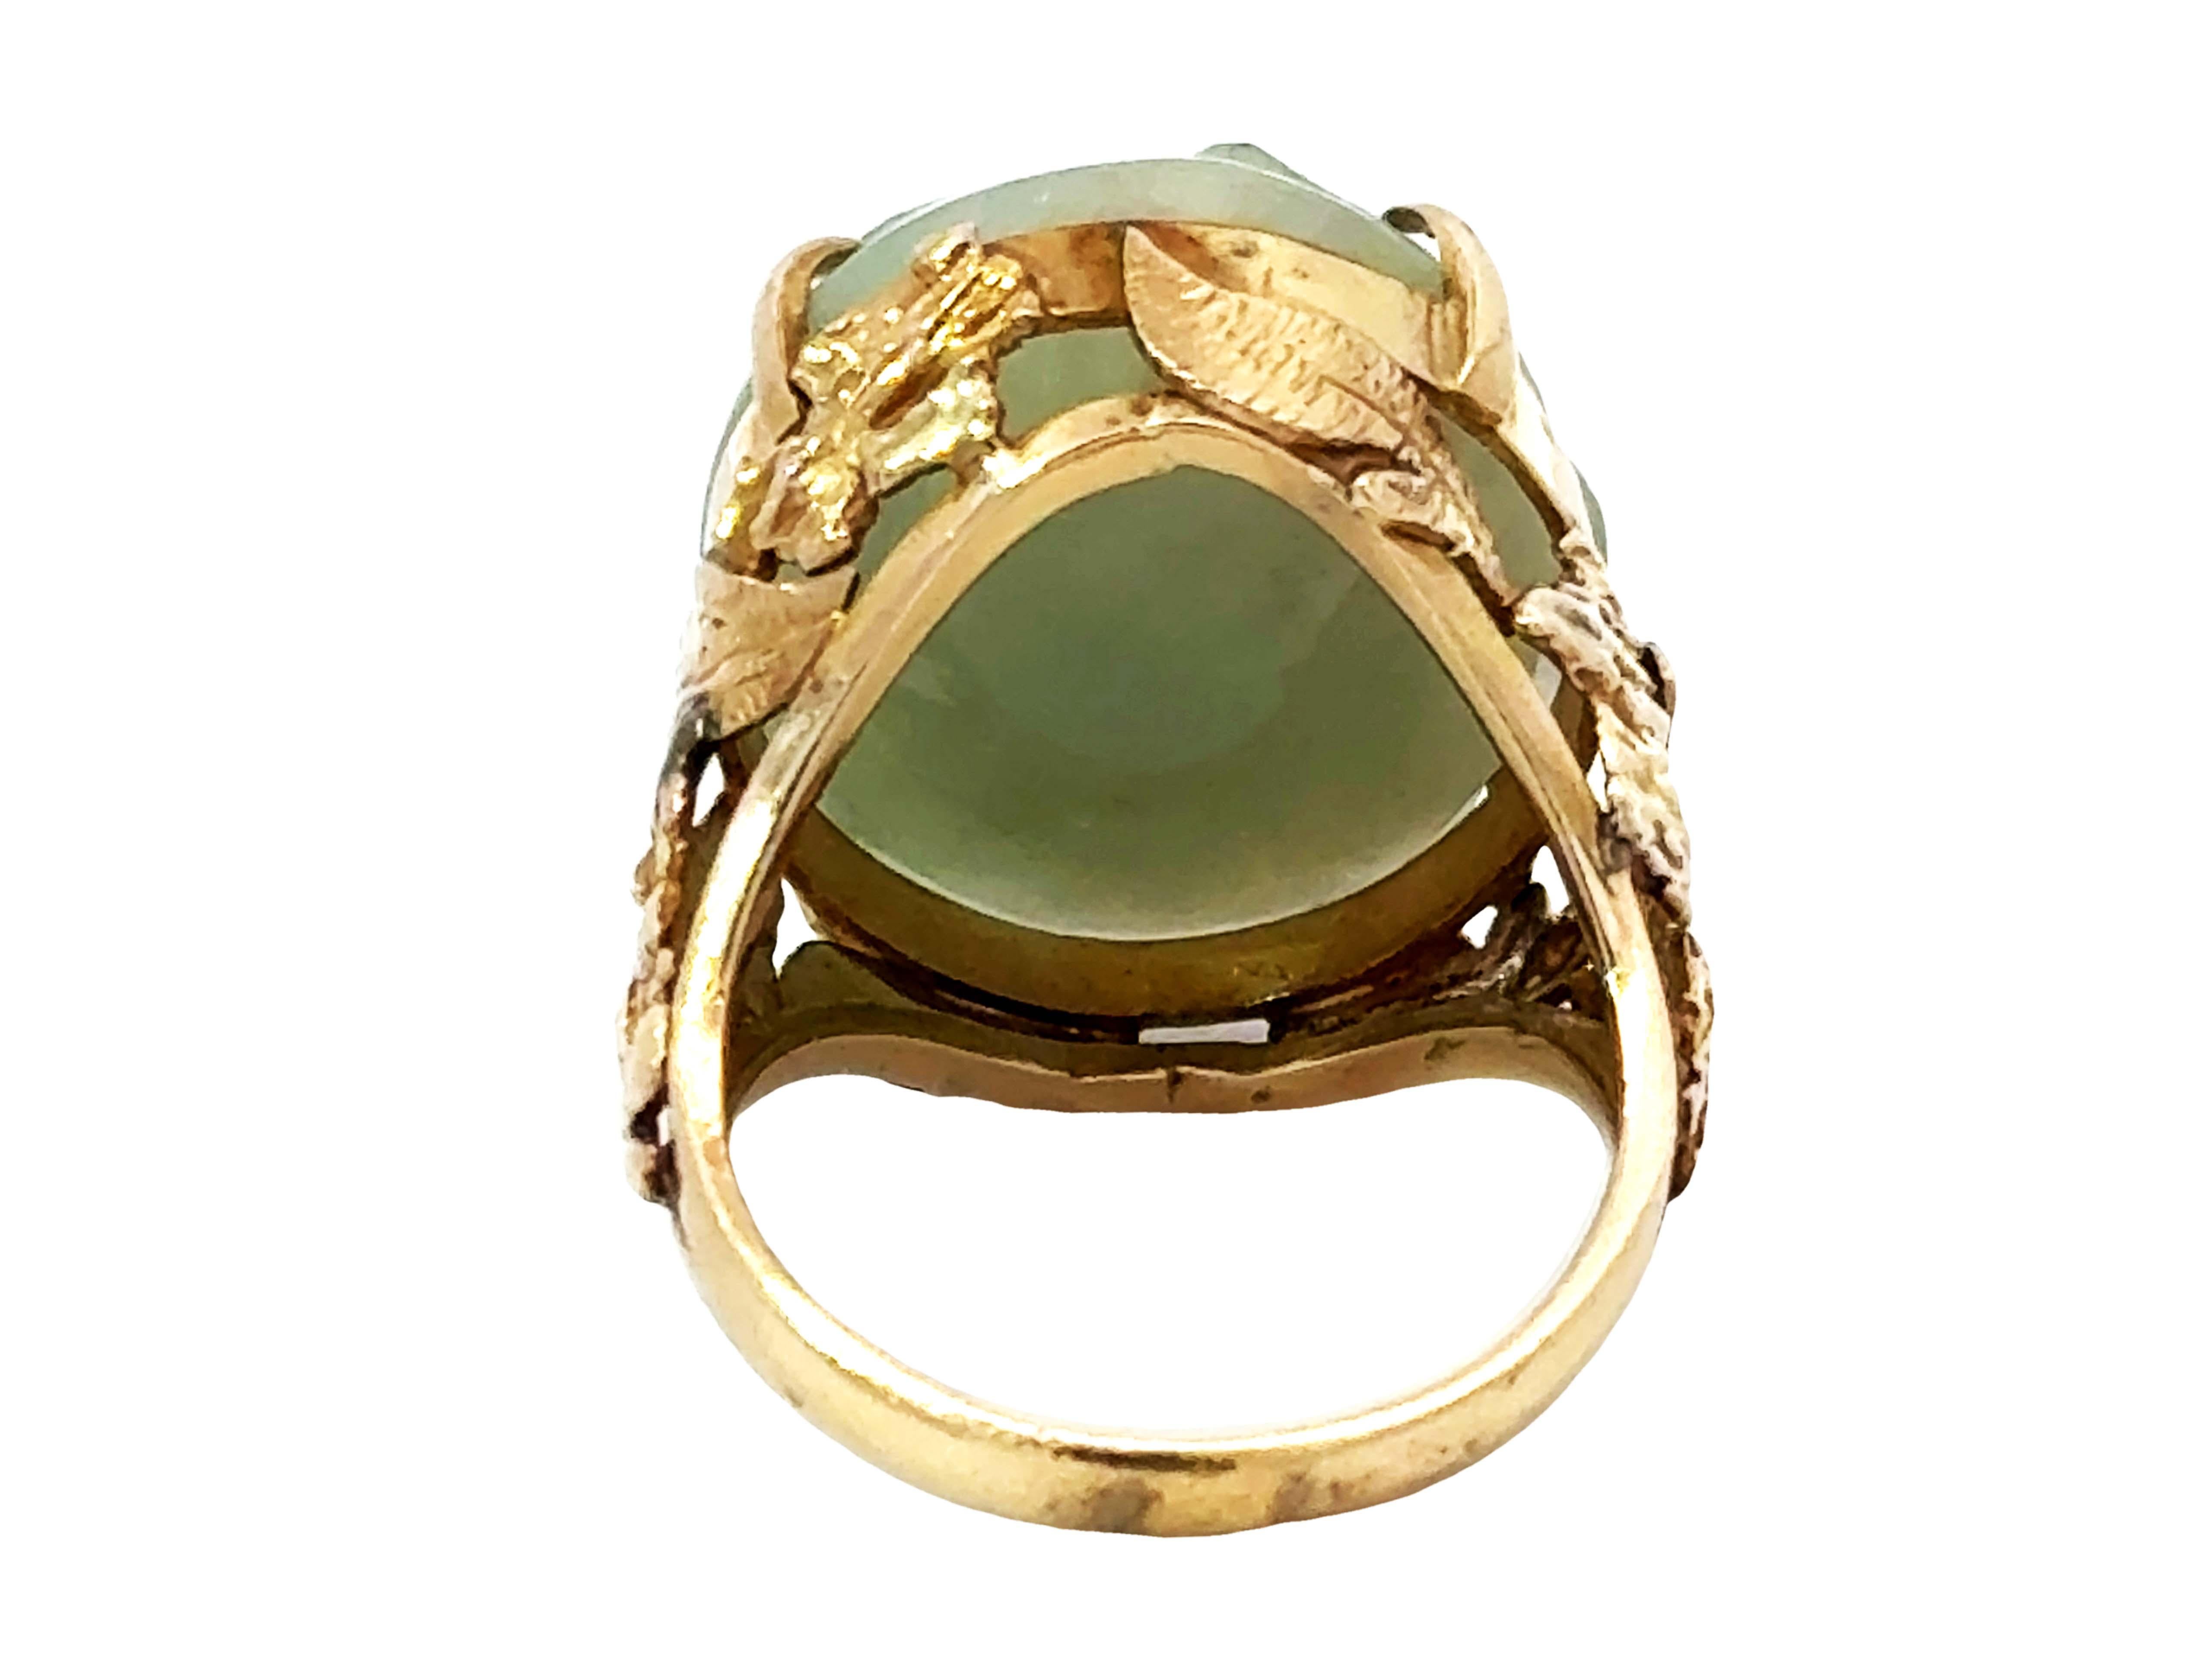 Carved Nephrite Jade Ring 14K Yellow Gold For Sale 1